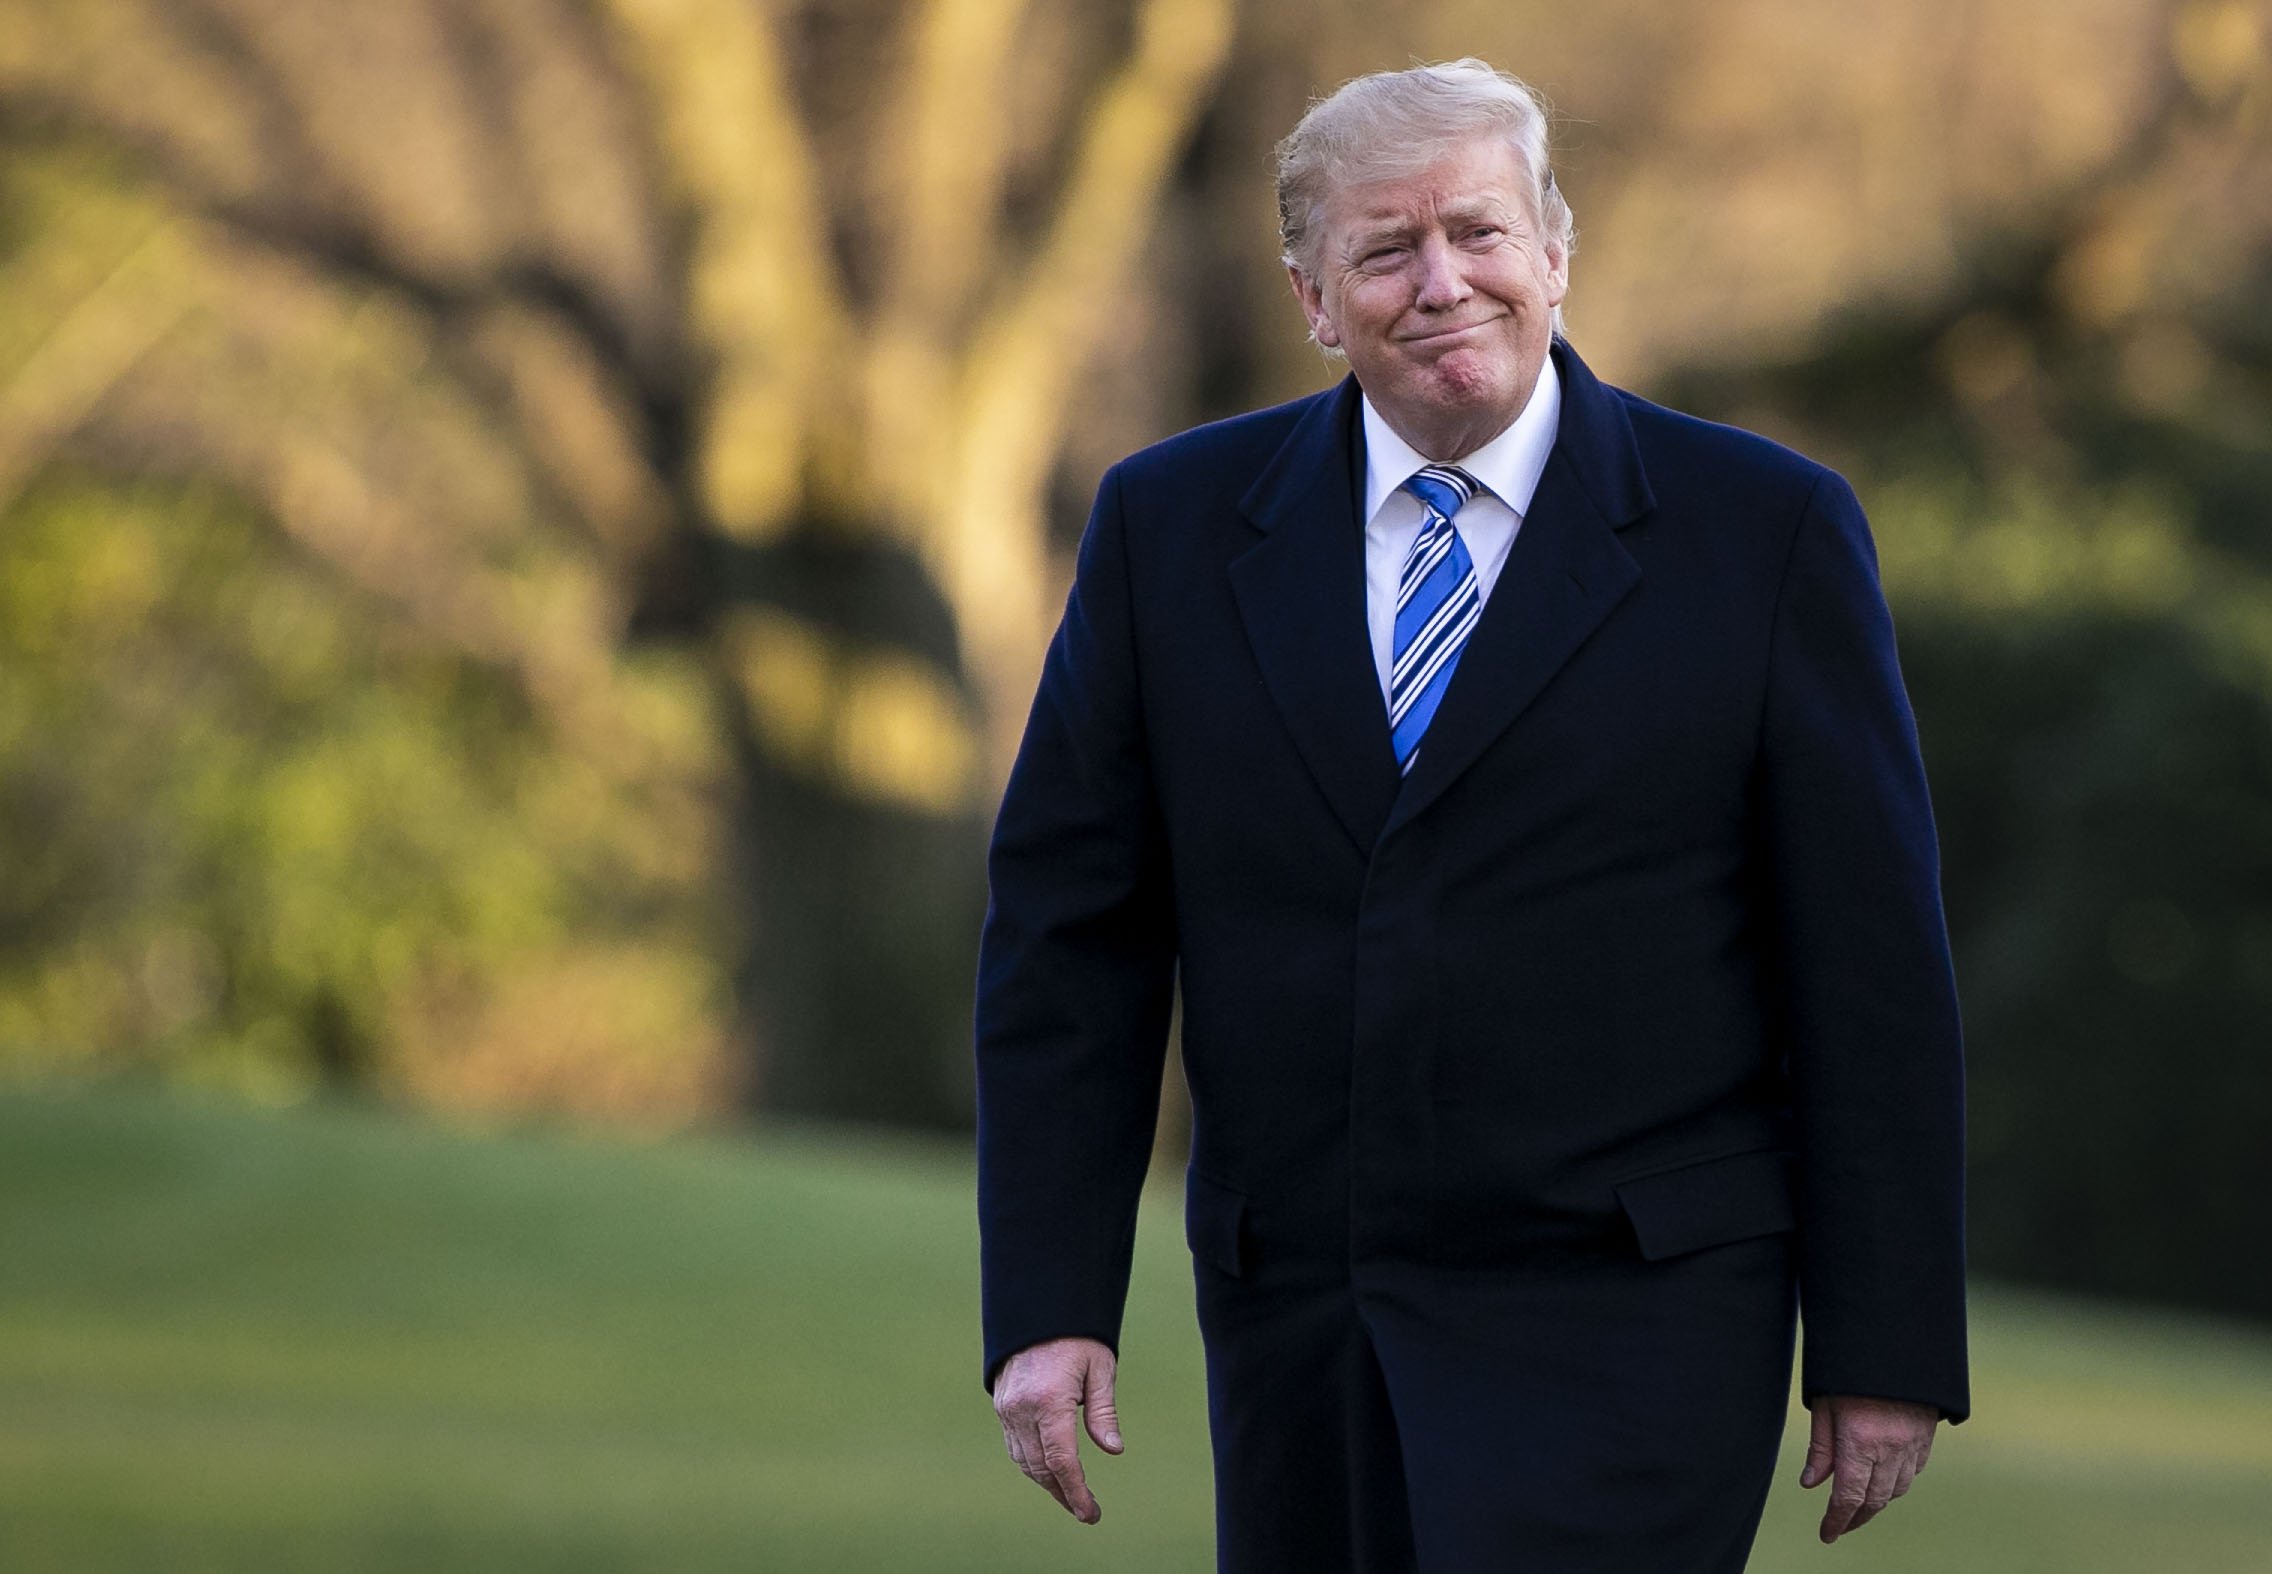 Donald Trump walks on the South Lawn of the White House, on March 10, 2019 | Photo: GettyImages